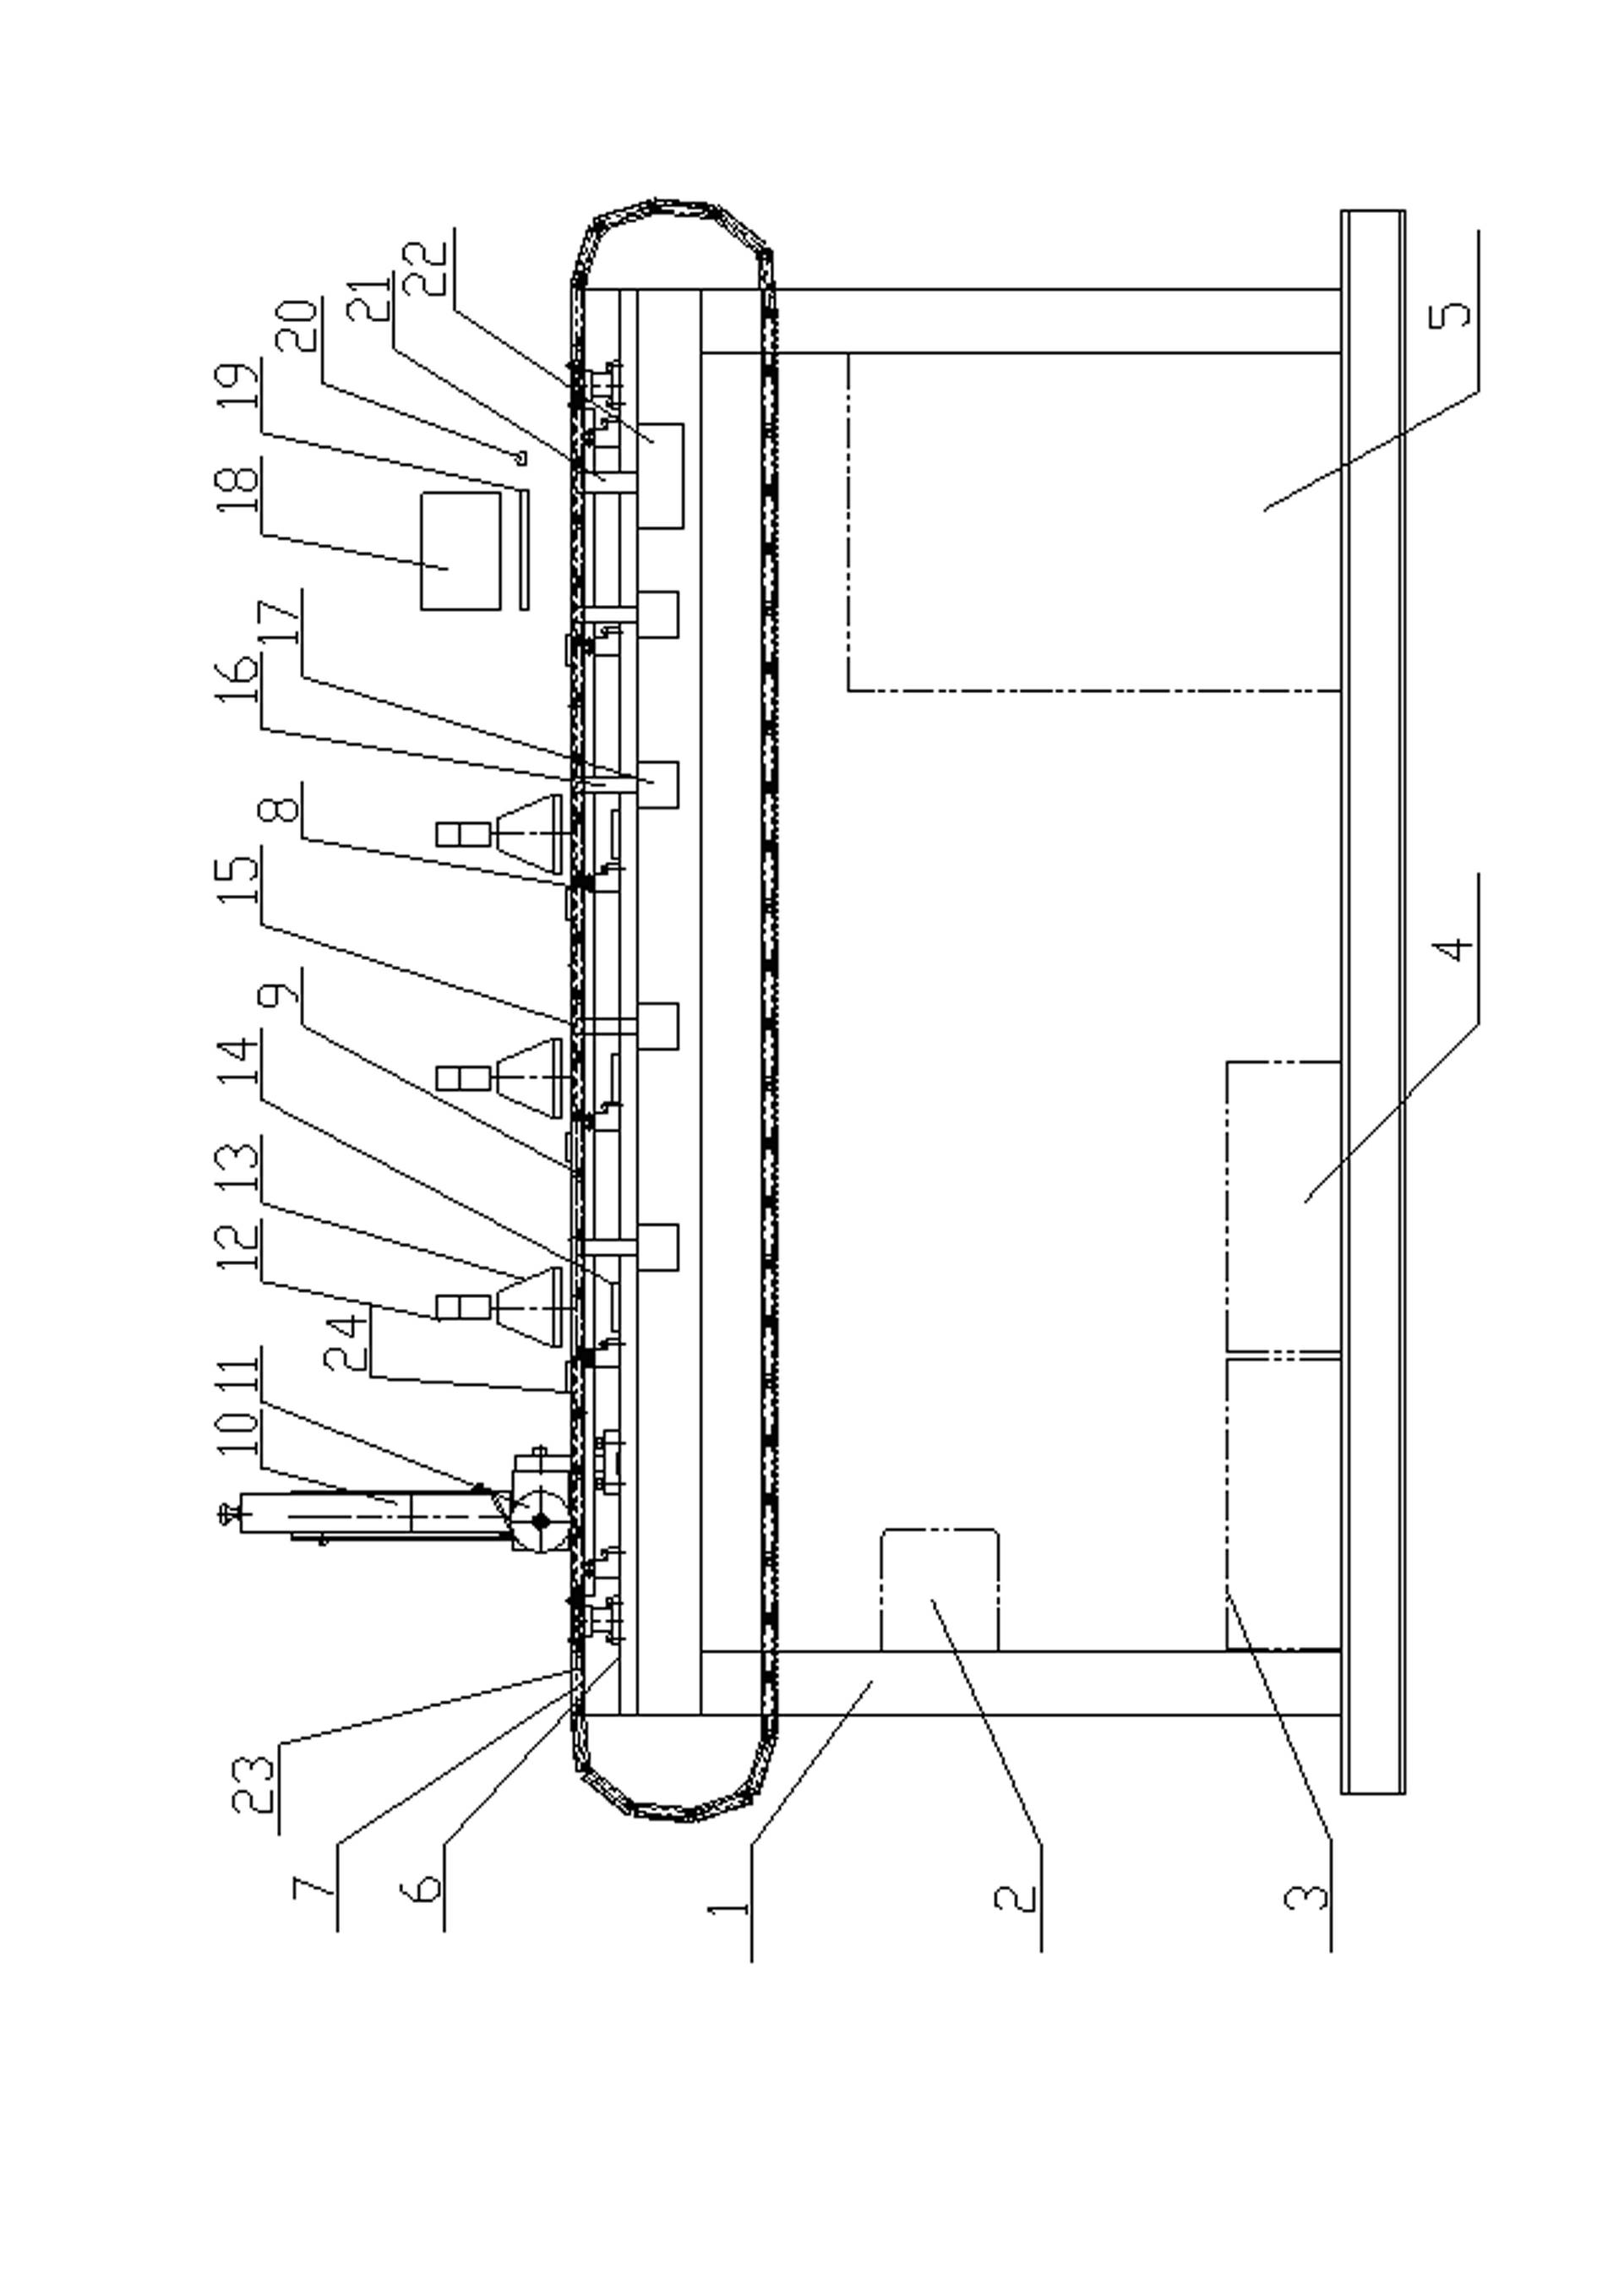 Device for detecting quality of machine needle